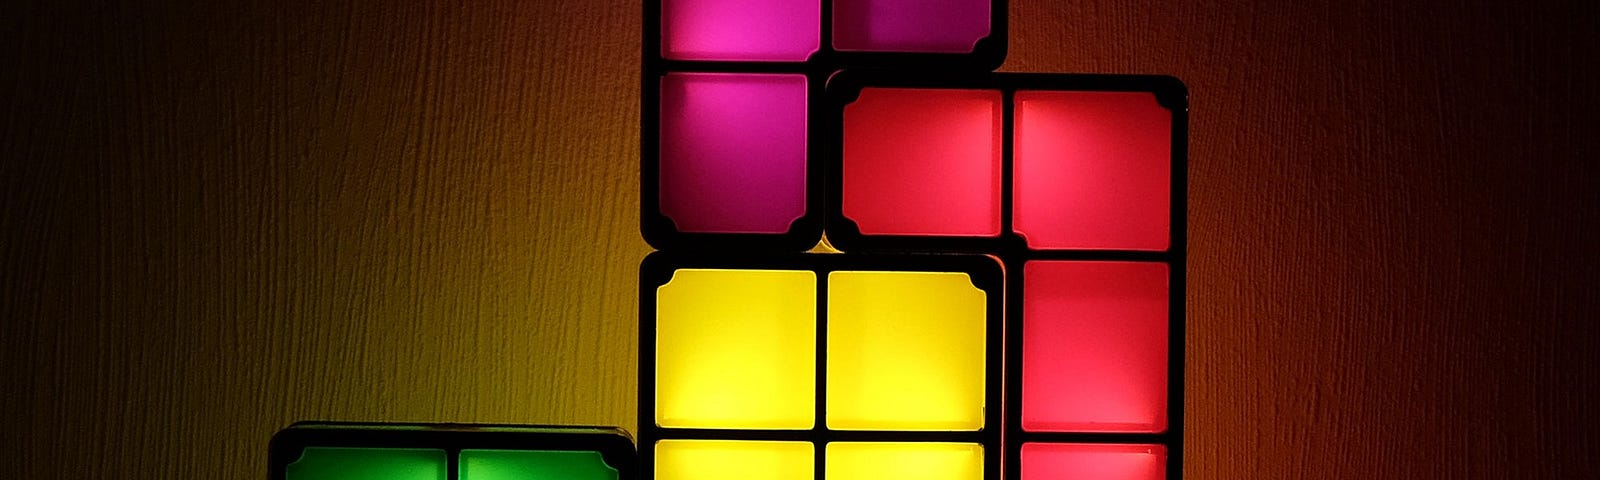 This is a tall rectangular picture with different shaped and colored blocks in front of a white wall. The background is dark but the shapes are internally lit. The shapes are from the traditional Nintendo Game — Tetris.